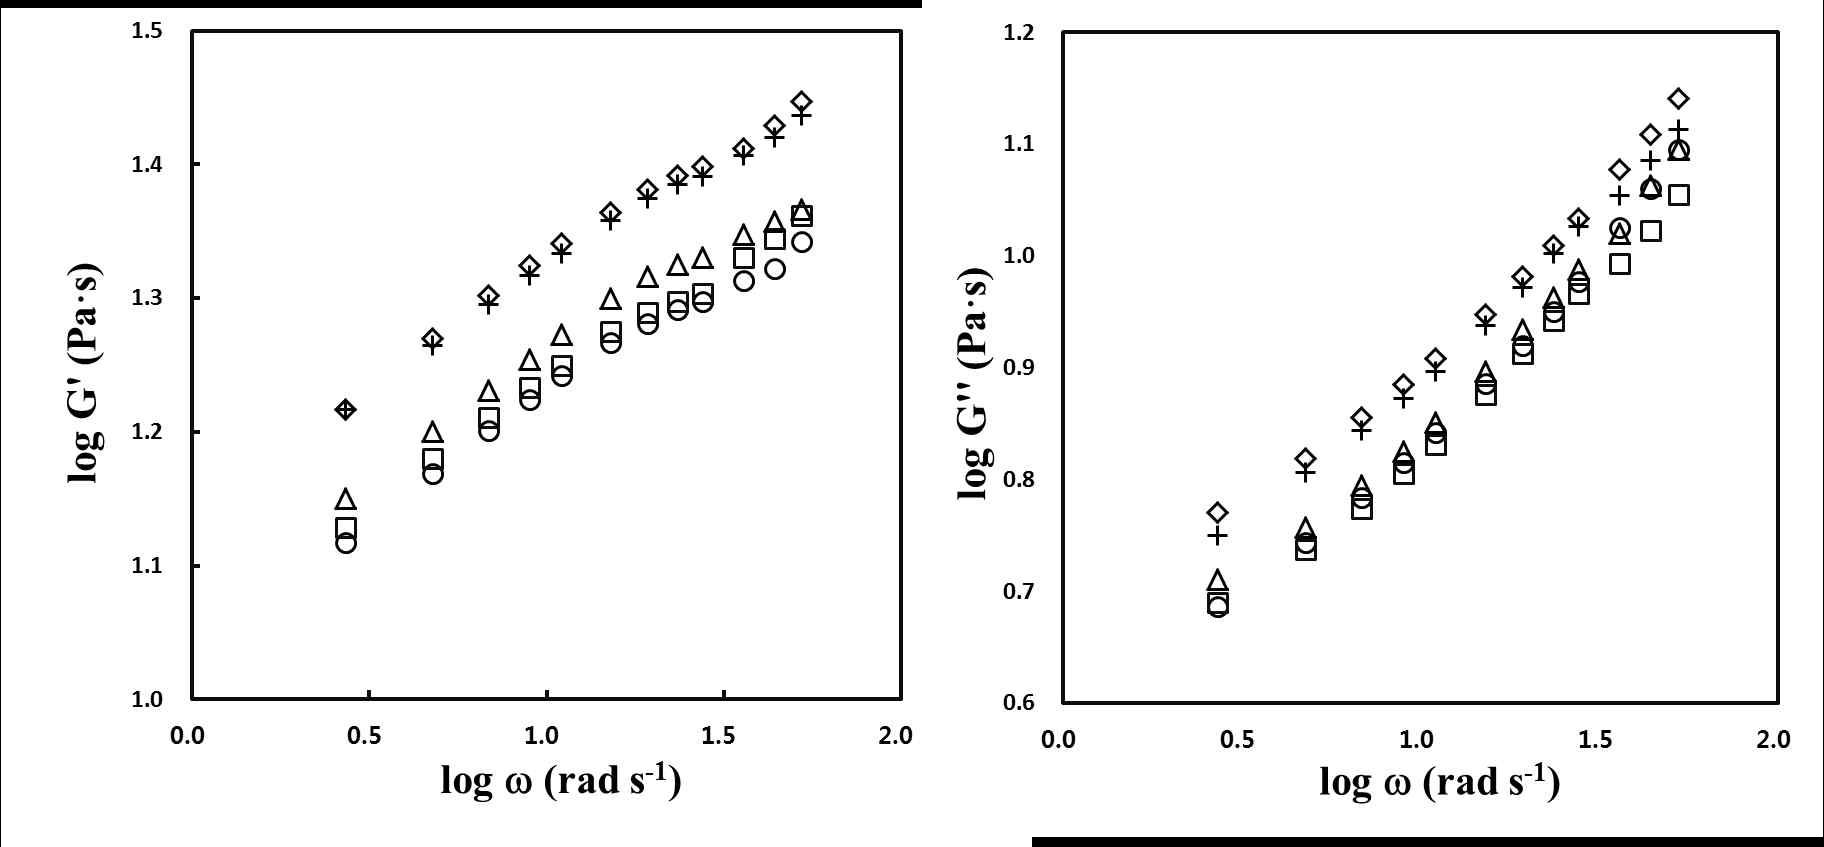 Plots of log ω versus log (G’ and G’’) for granulated xanthan gum with various dextrin concentrations at 20℃. (◯) none granulation, (□) dextrin 0%, (△) dextrin 5%, (◇) dextrin 10%, (+) dextrin 15%.